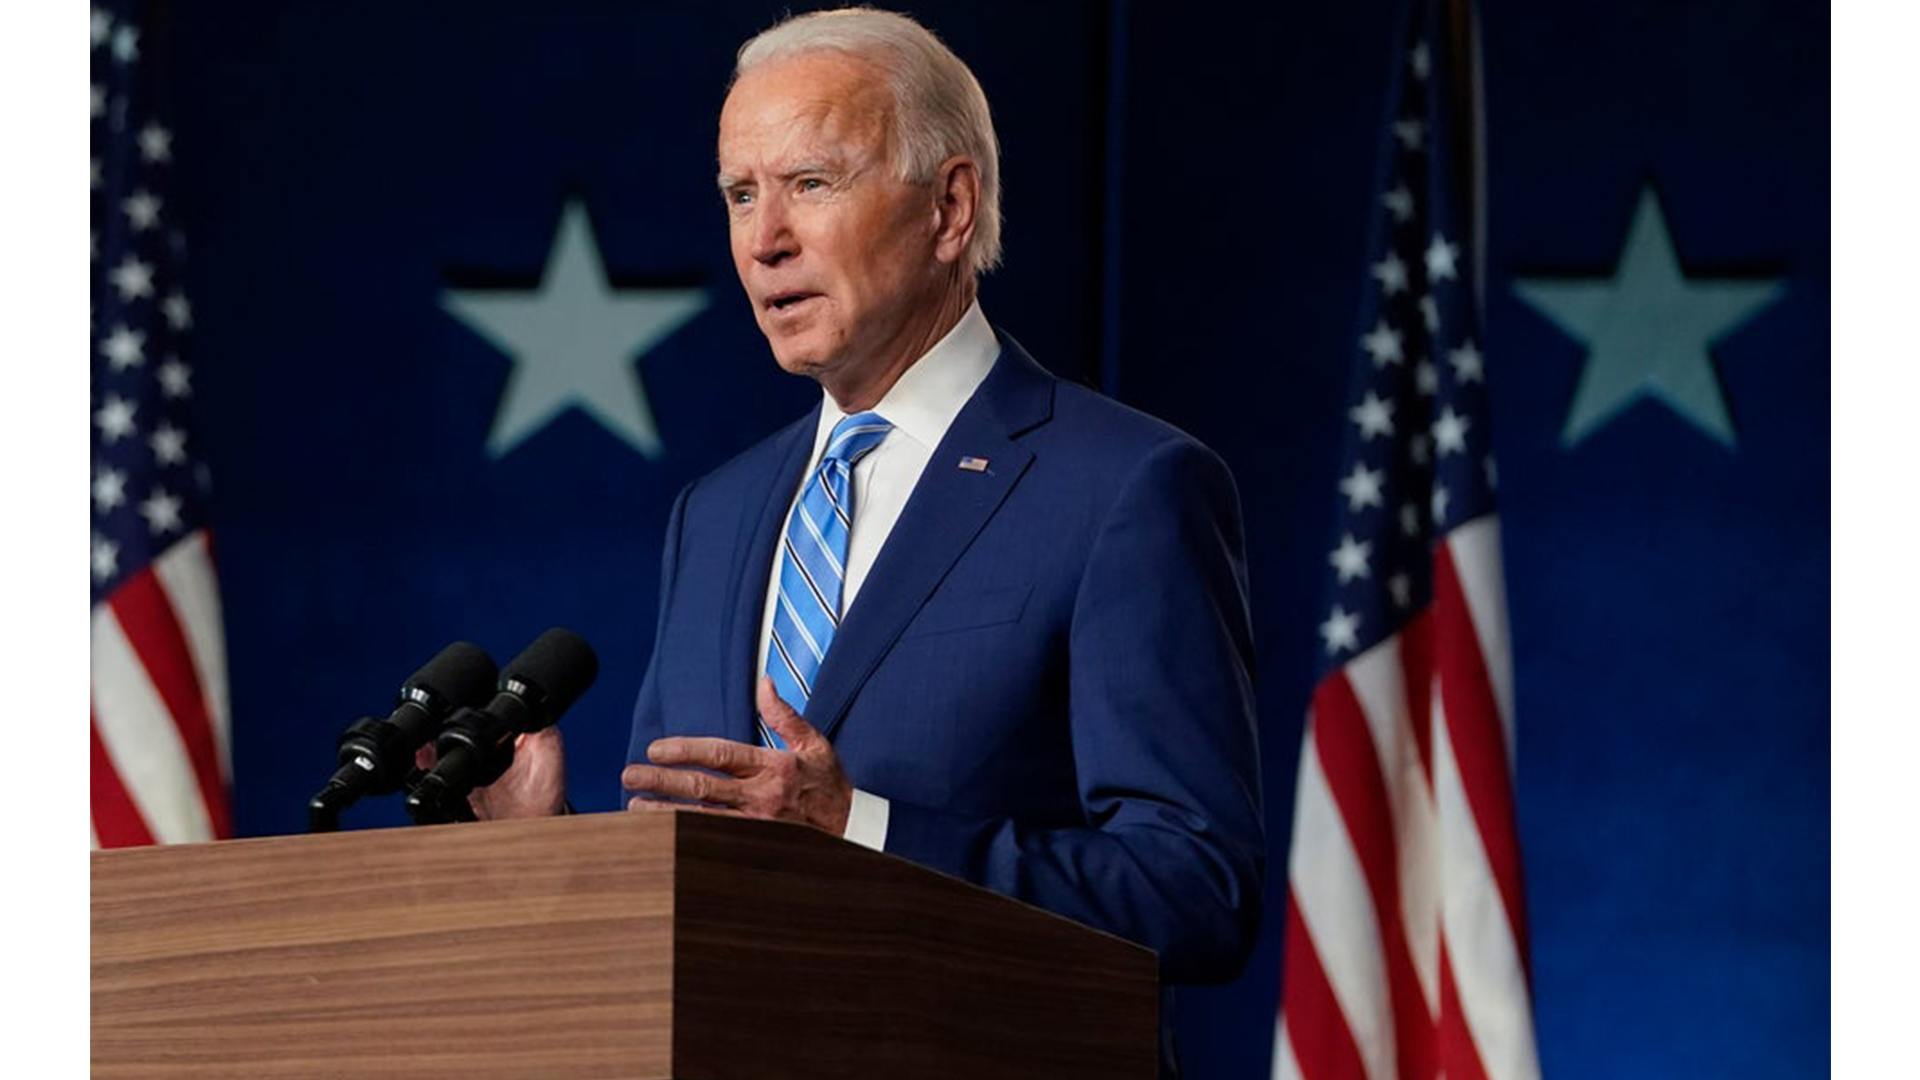 After the approval of the US Congress, Biden became the official president